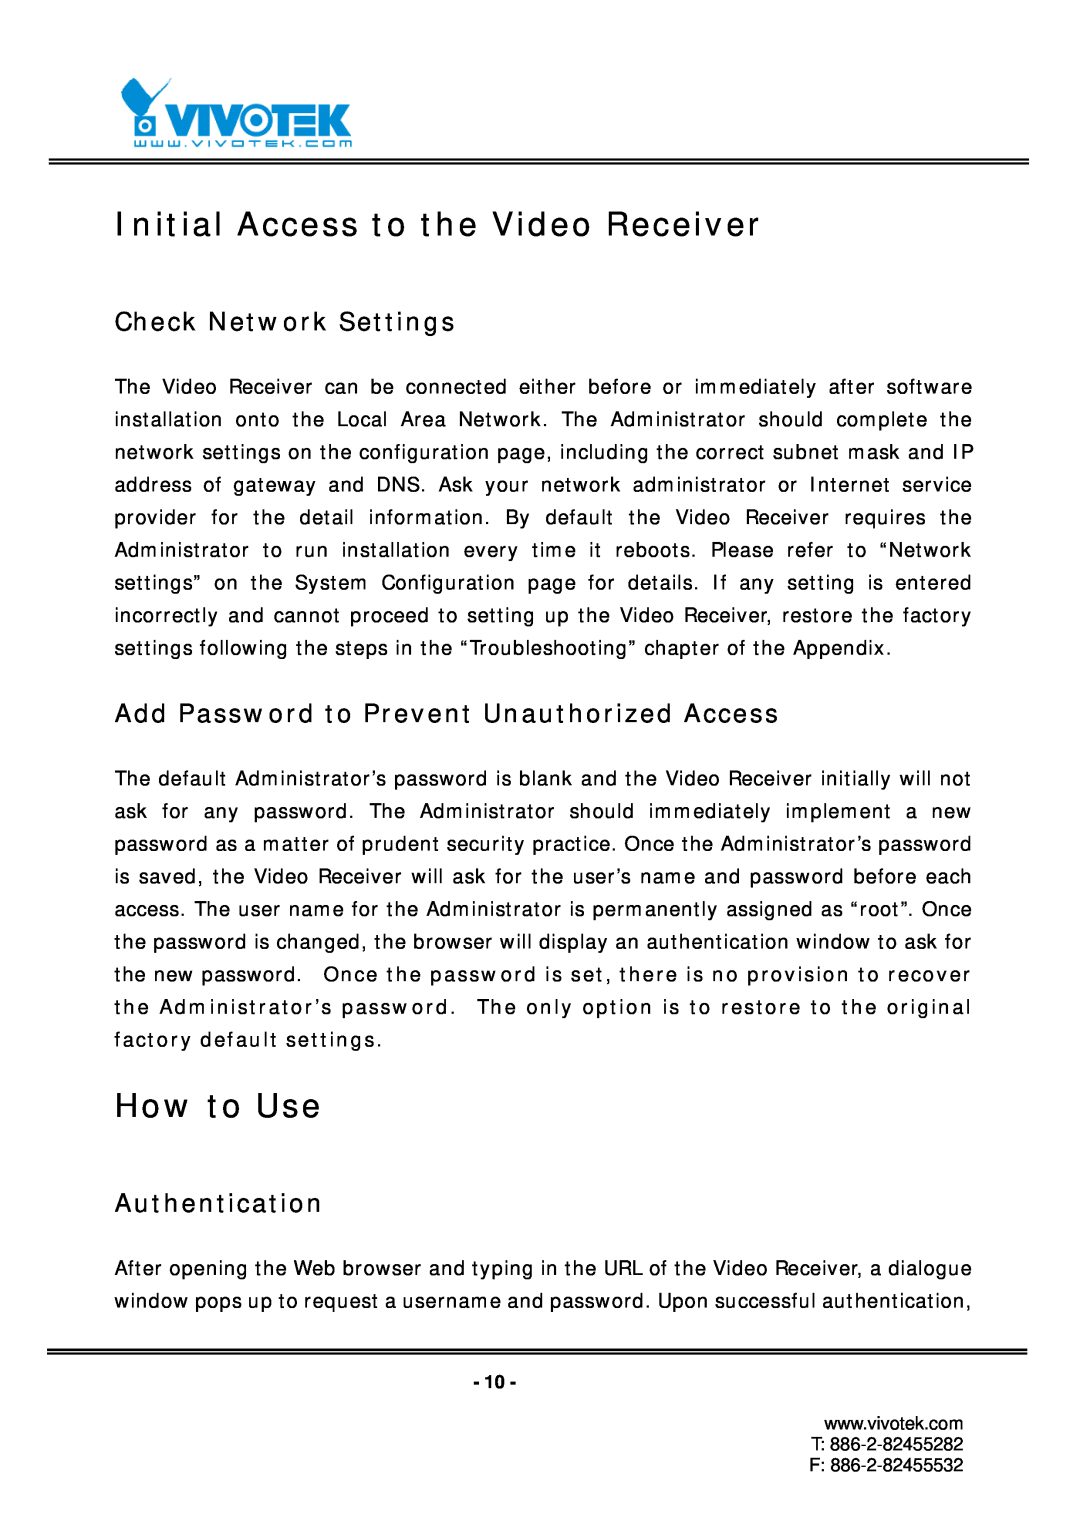 Vivotek RX7101 manual Initial Access to the Video Receiver, How to Use, Check Network Settings, Authentication 